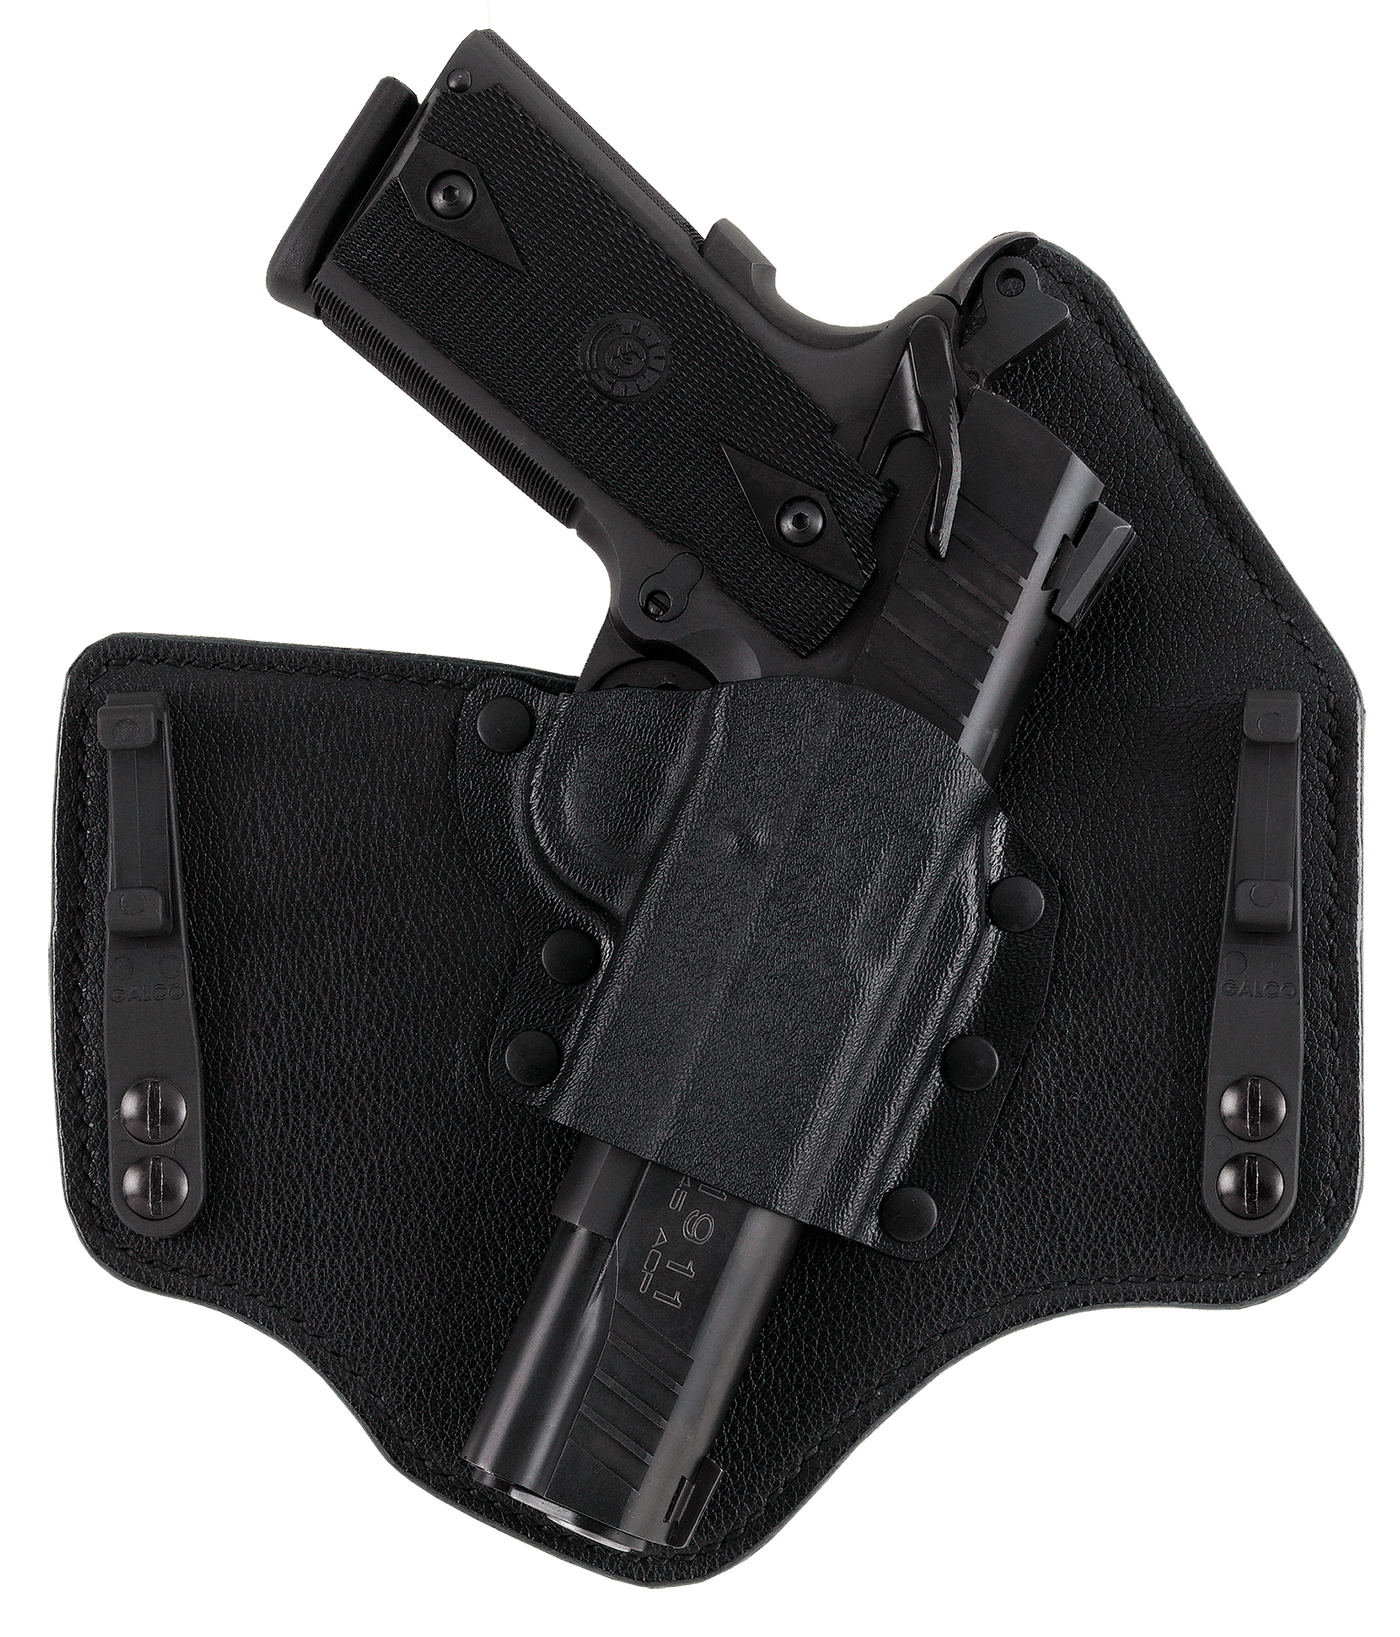 Galco Galco Kingtuk Iwb Clip Holster - Rh Hybrid Glock 2021 Black Holsters And Related Items